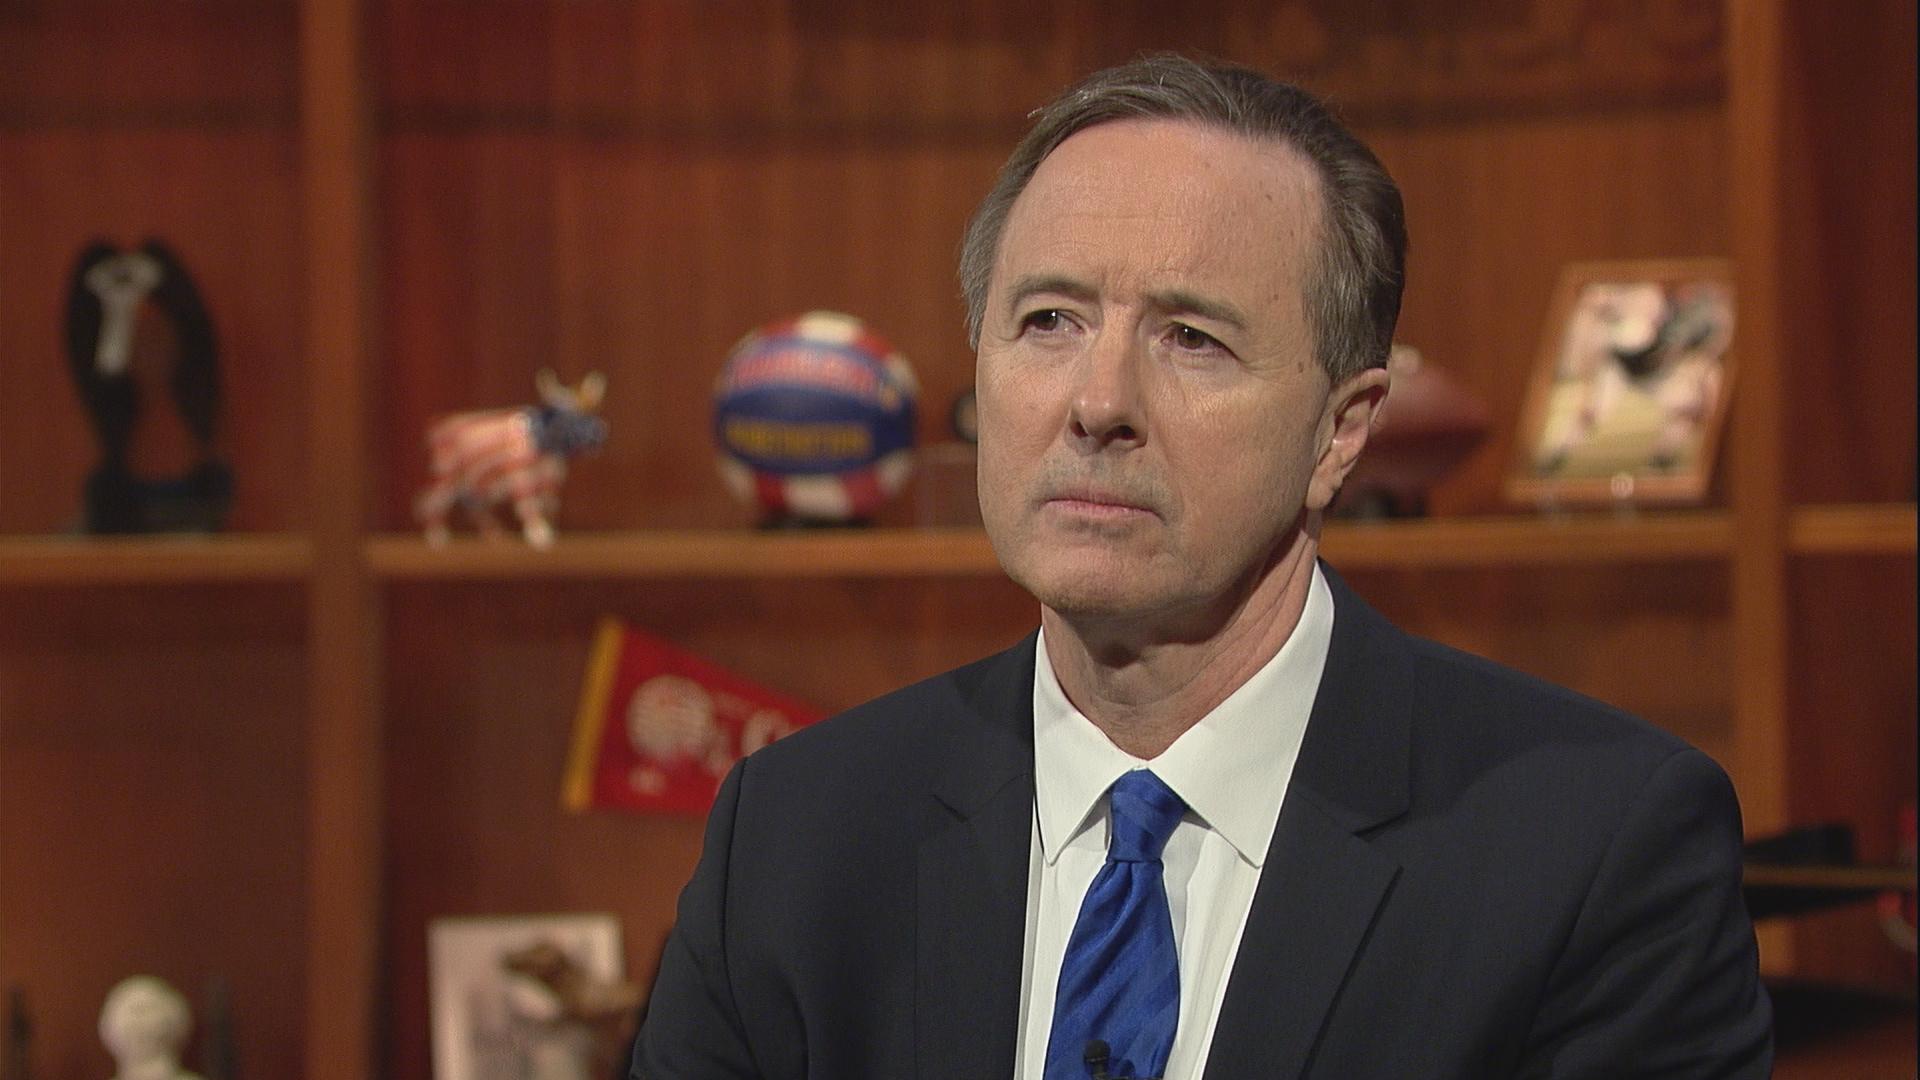 CPS CEO Forrest Claypool joined "Chicago Tonight" on Feb. 3, just two days after the CTU unanimously rejected the district's offer.